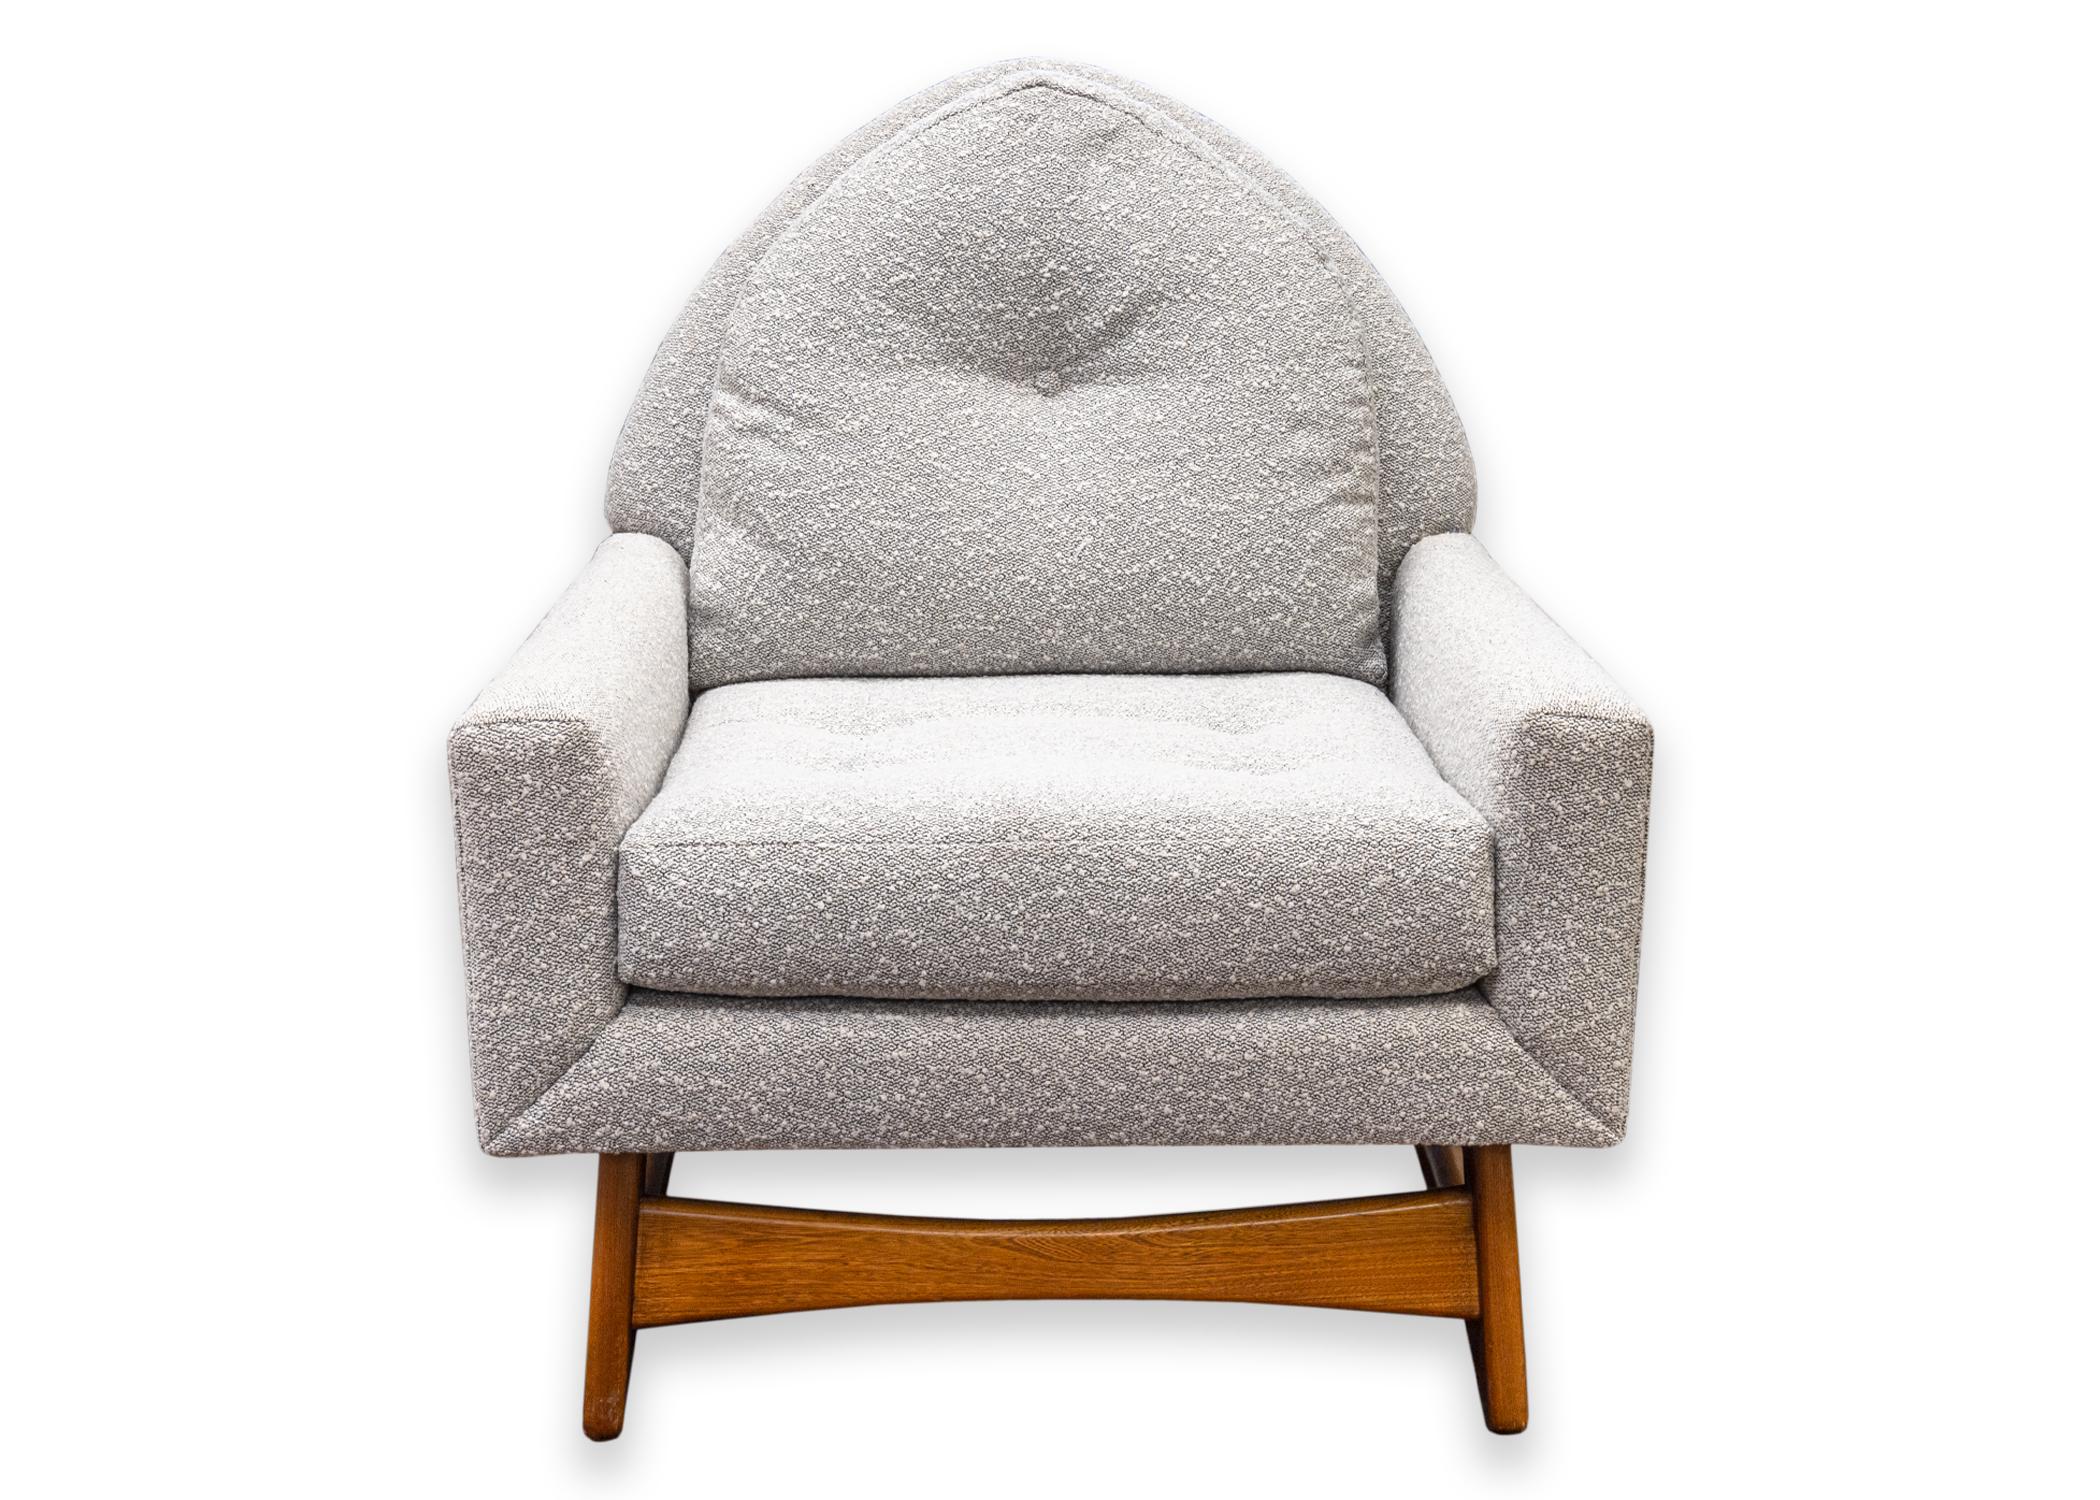 An Adrian Pearsall style Kroehler accent chair. A beautiful accent piece with a super cozy reupholstered grey fabric, removable seat cushion, and a curved walnut wood base frame. Both the seat cushion and the back have a lovely tufted design. This